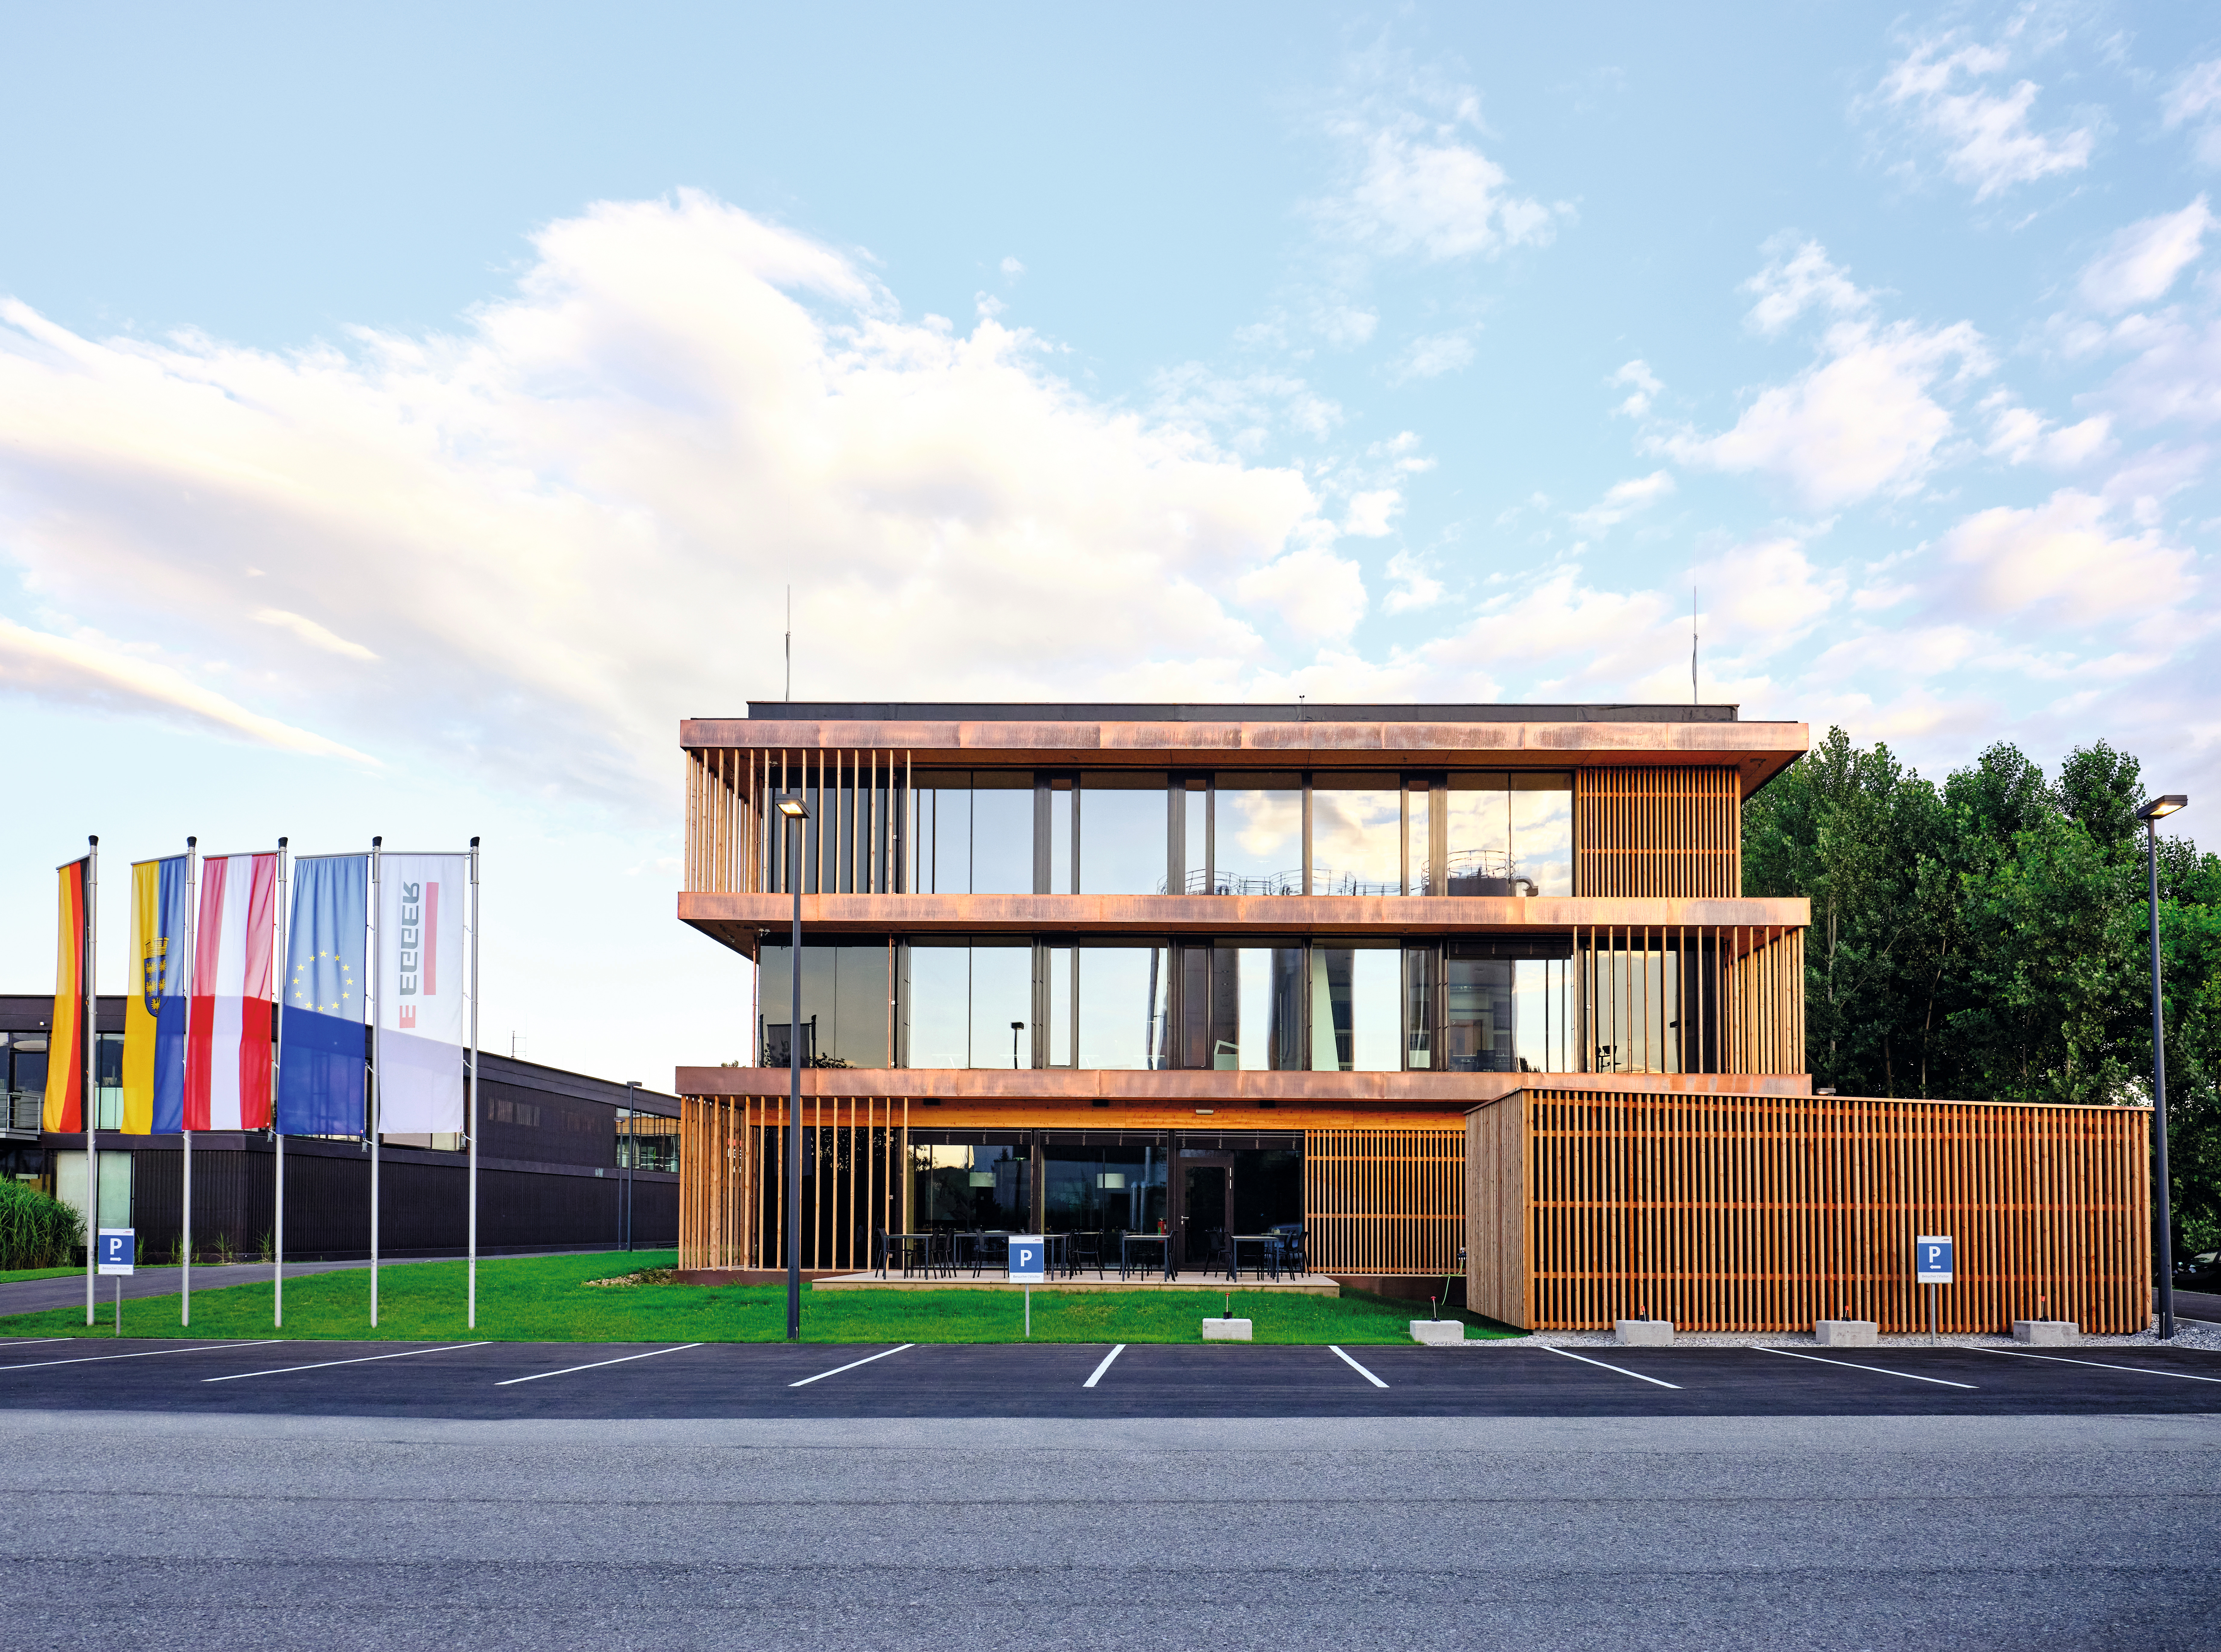 The wooden lamella curtains create a lively facade.